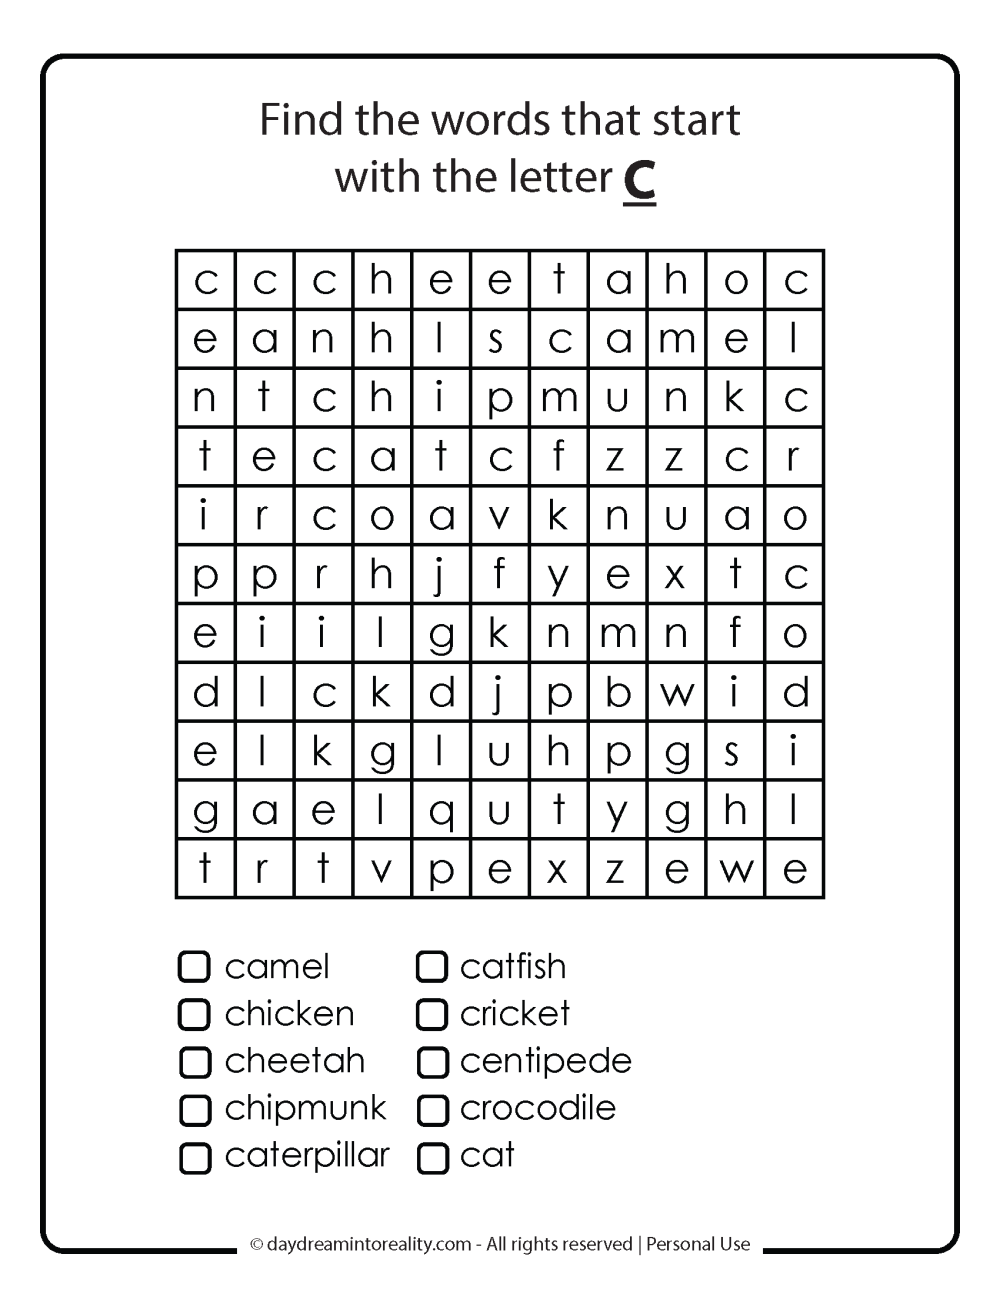 Letter C word search free printable